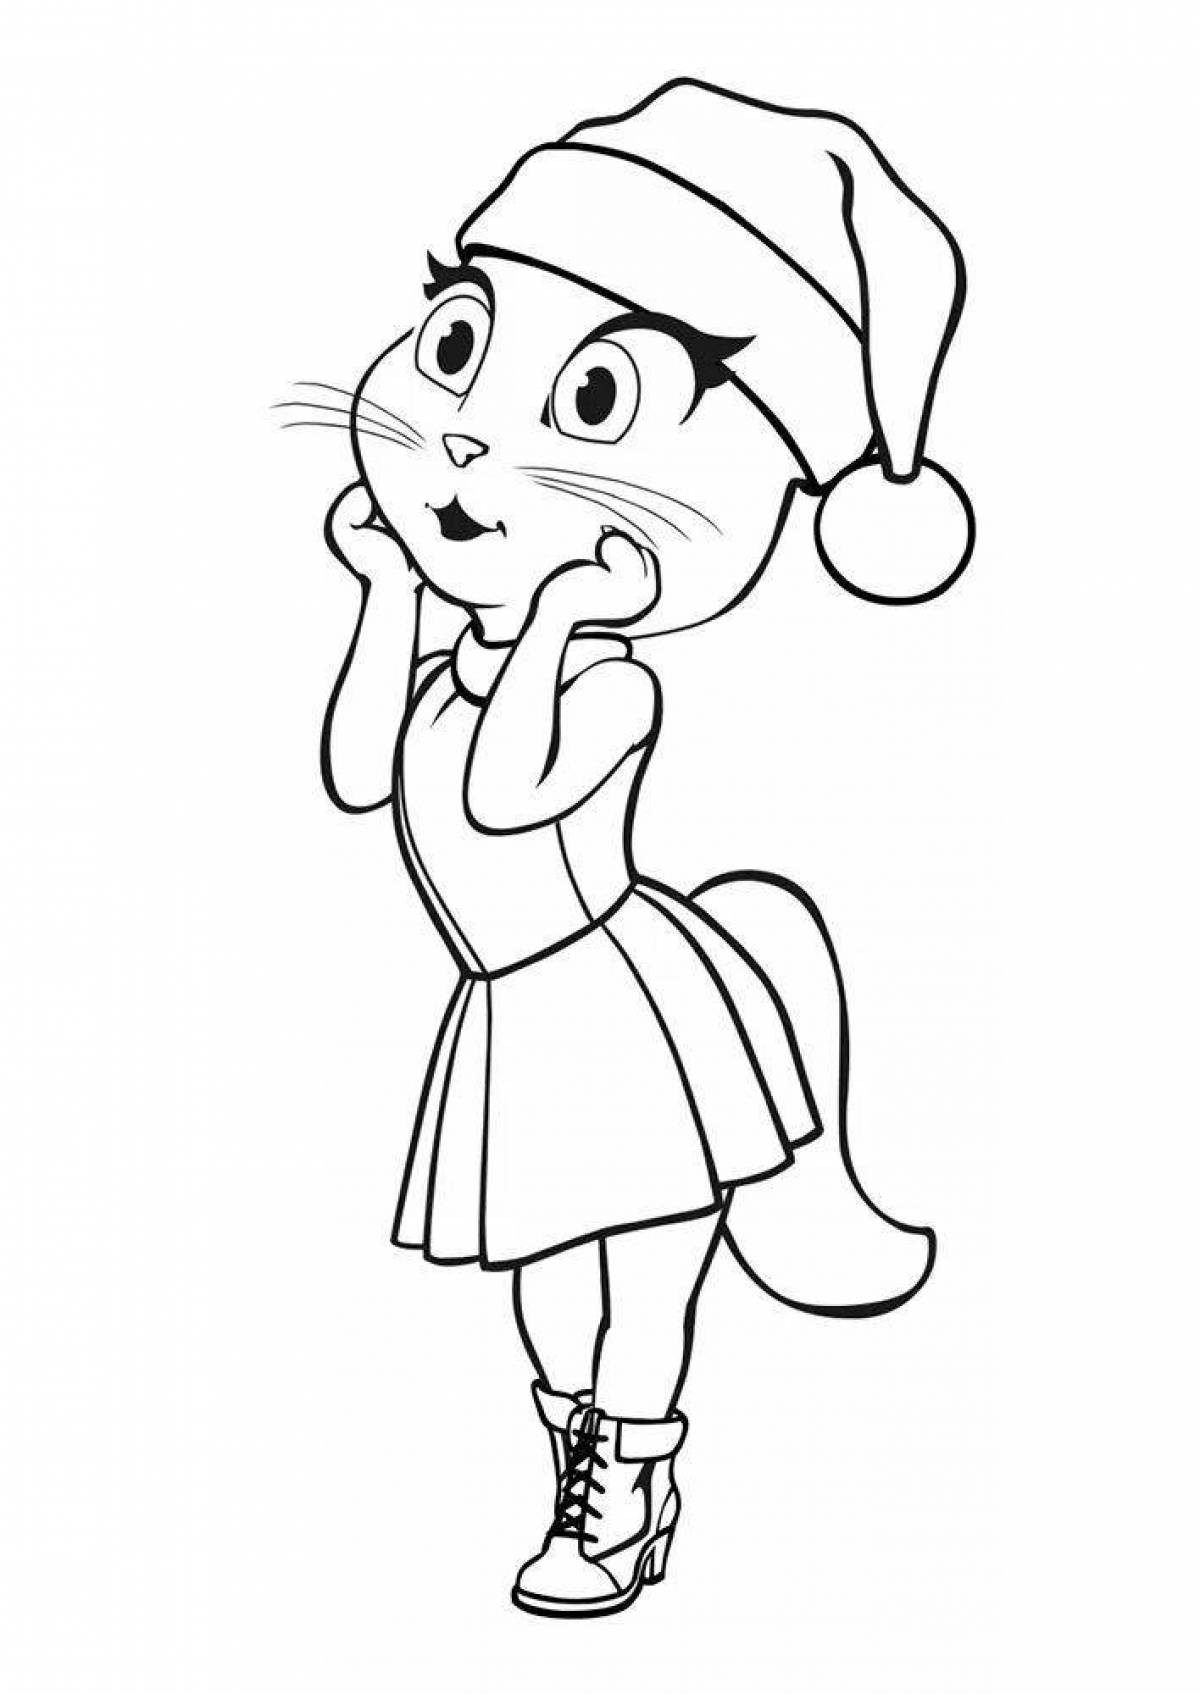 Quirky angela kitty coloring book